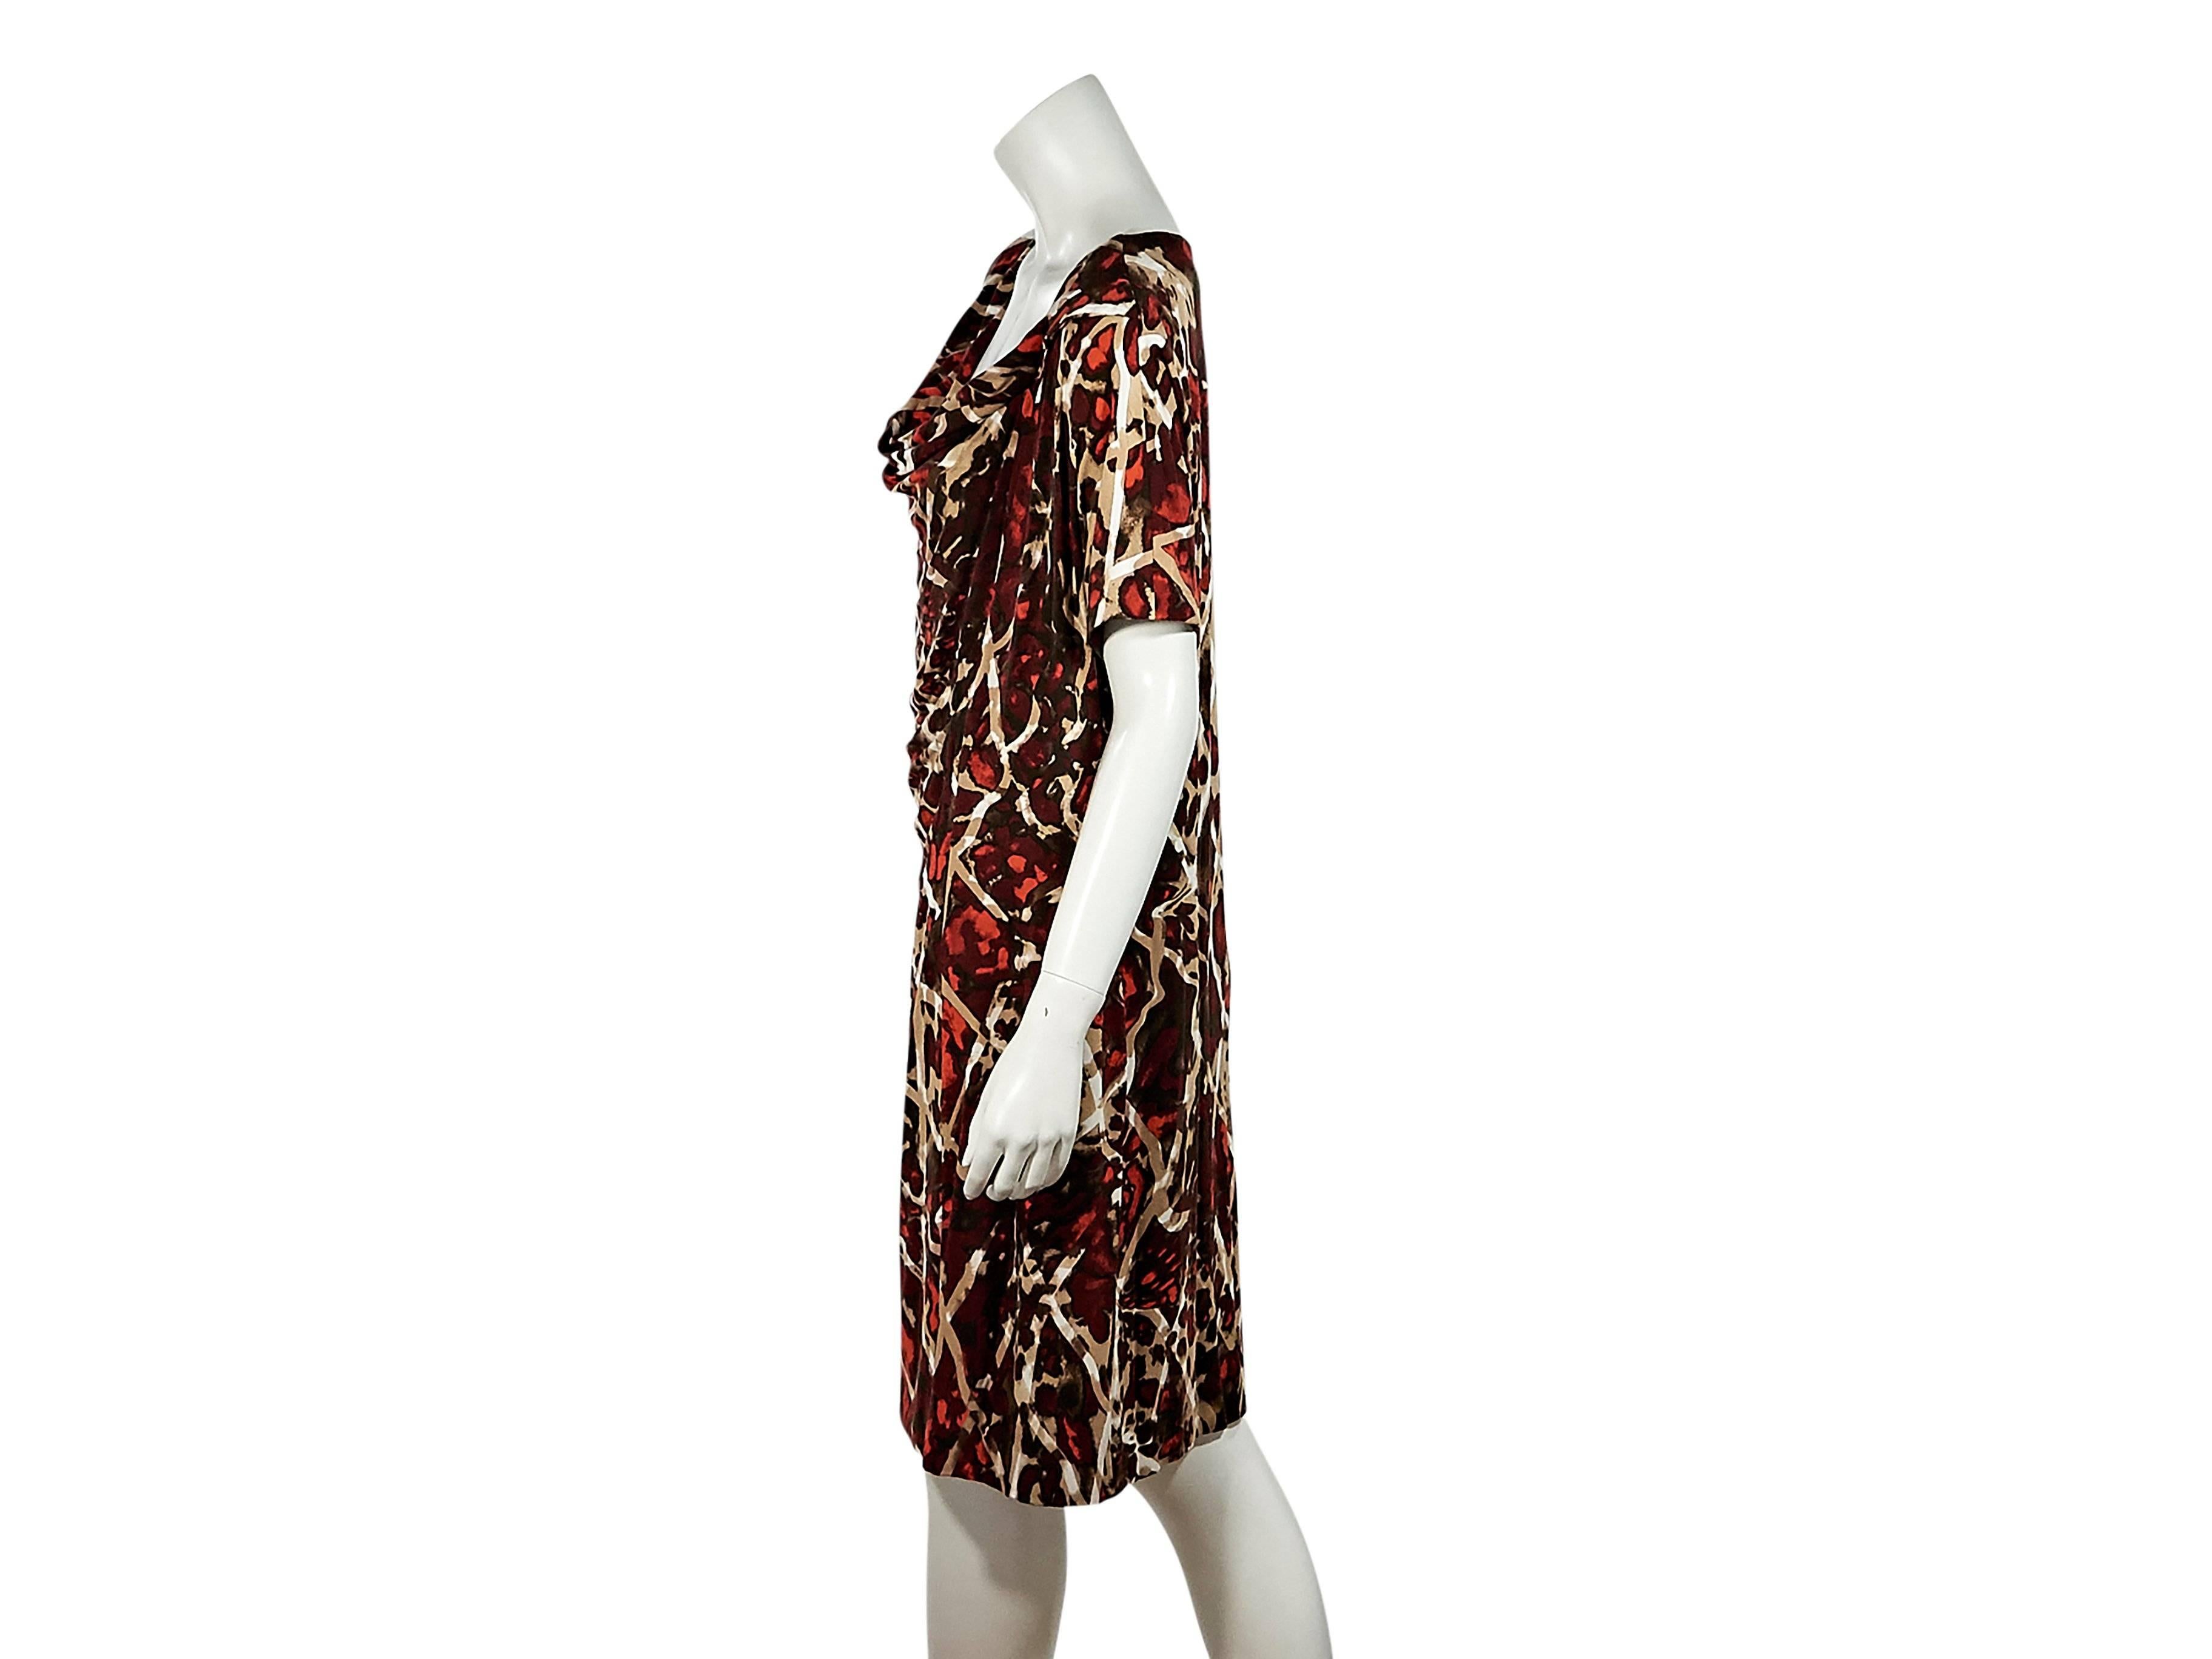 Product details:  Red abstract-printed jersey dress by Escada.  Scoopneck.  Short sleeves.  Draped front bodice.  Pullover style.   
Condition: Pre-owned. New with tags.
Est. Retail $ 995.00